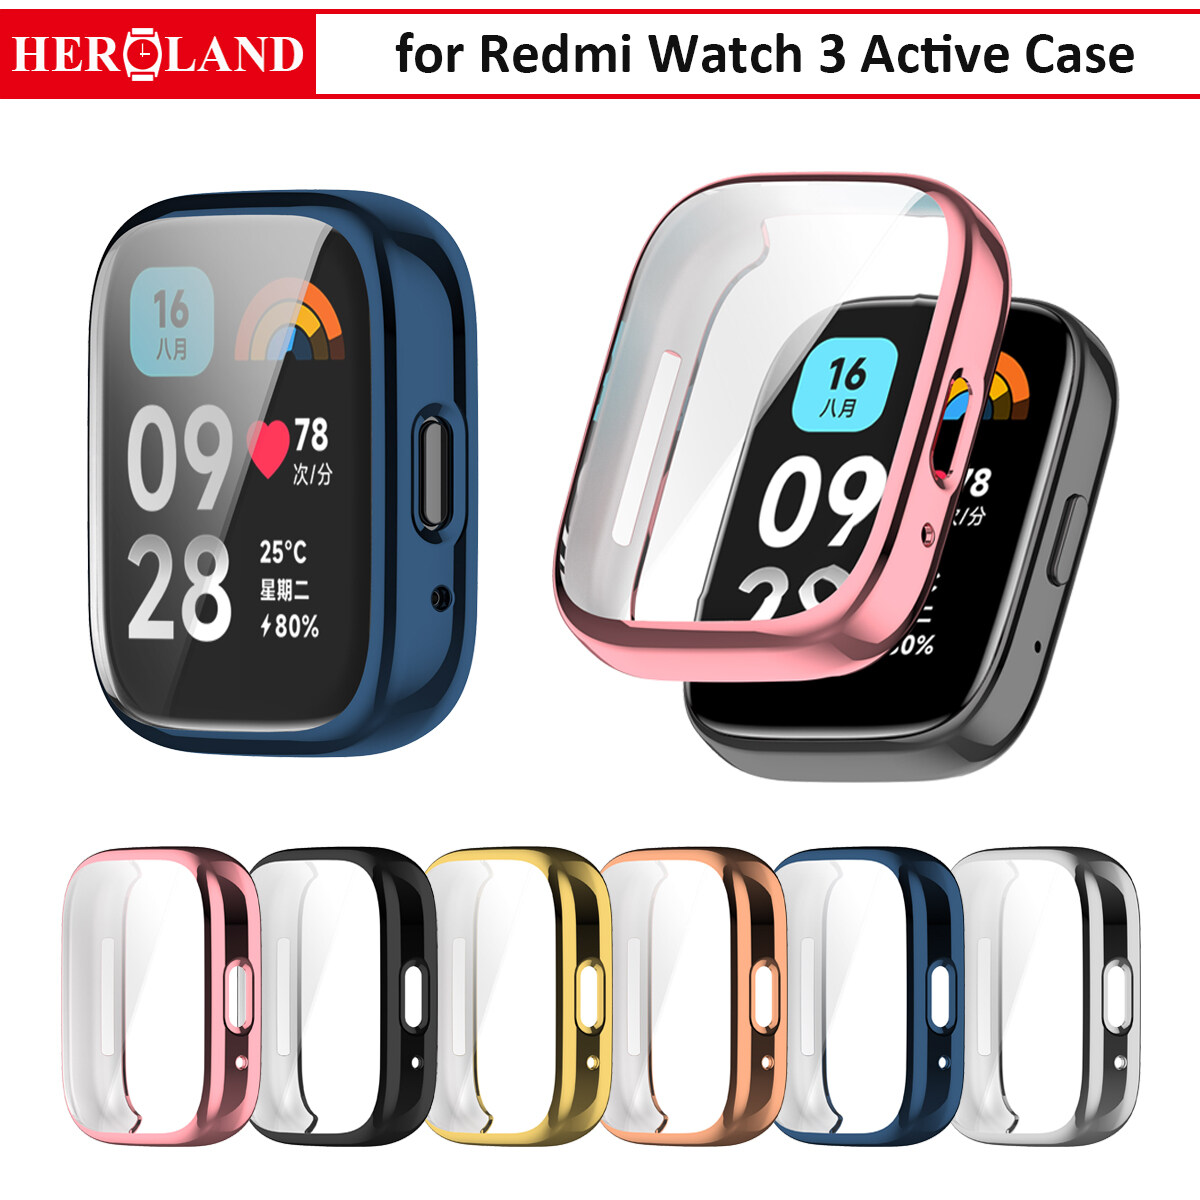 TPU Soft Case for Redmi Watch 3 Active Full Cover Shell